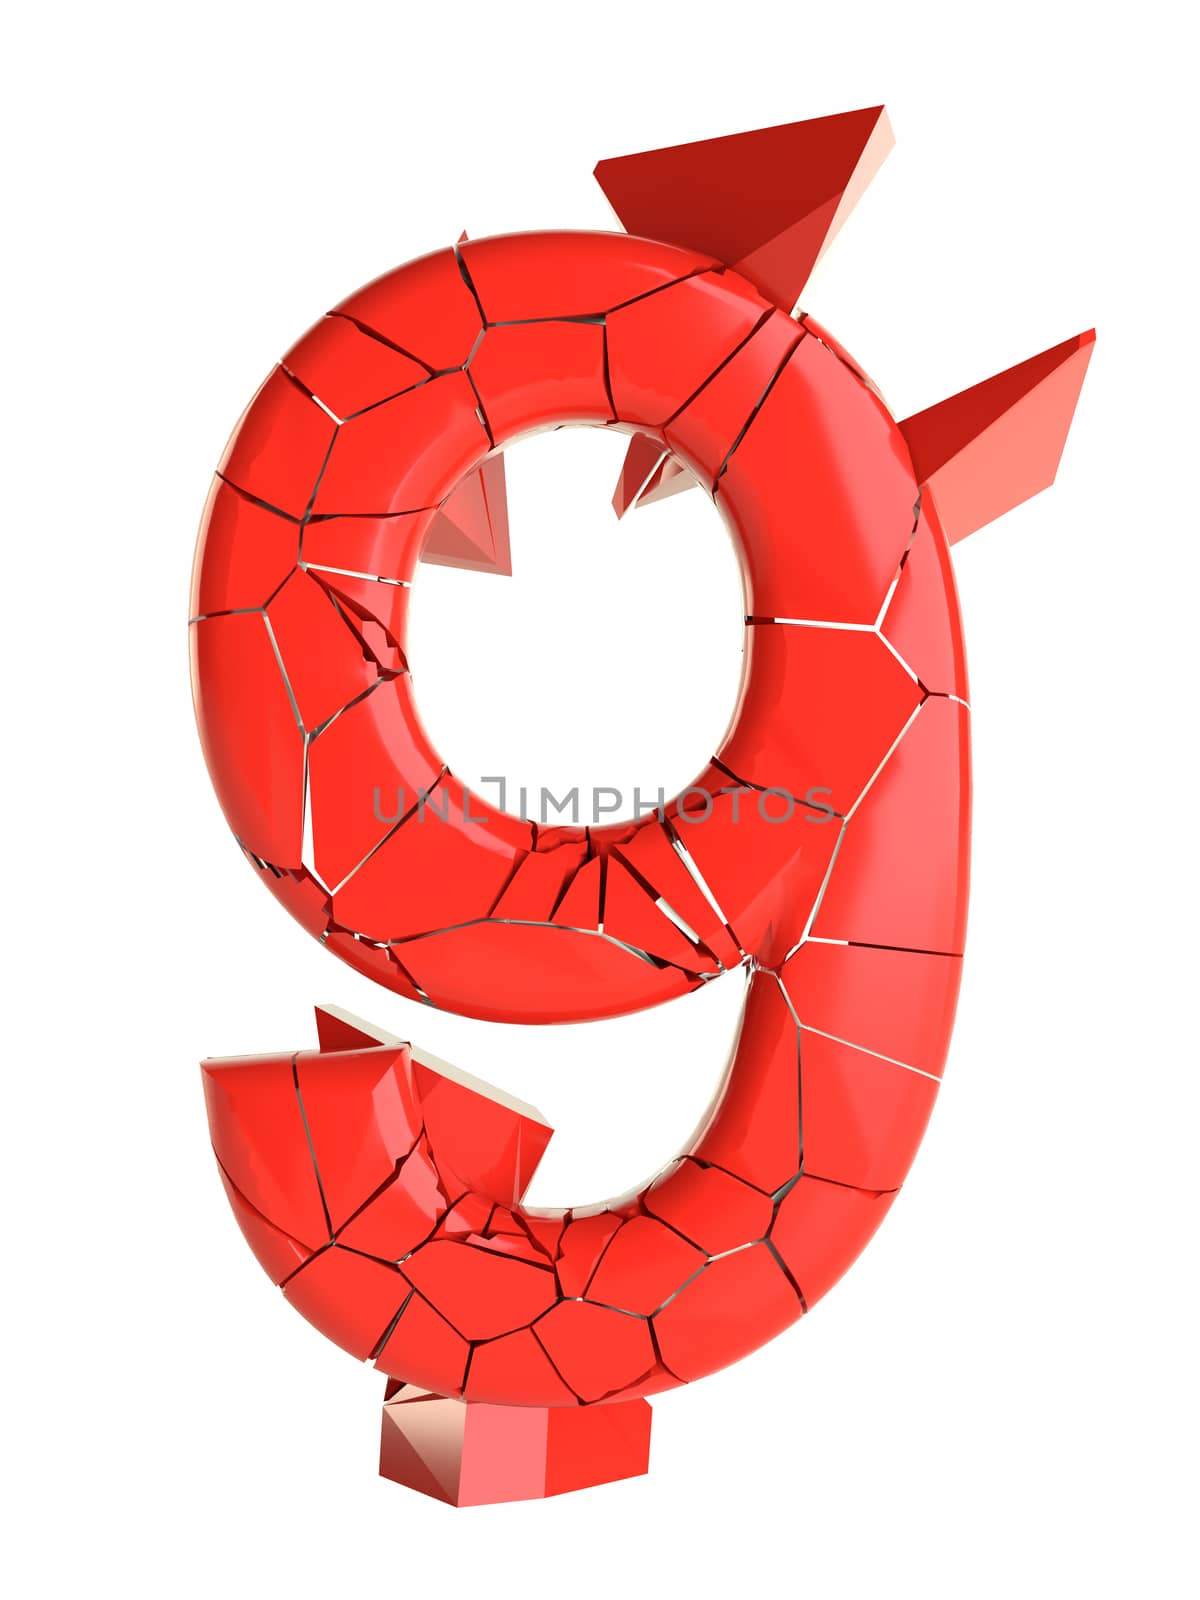 Futuristic red cracked number. 3D illustration by cherezoff